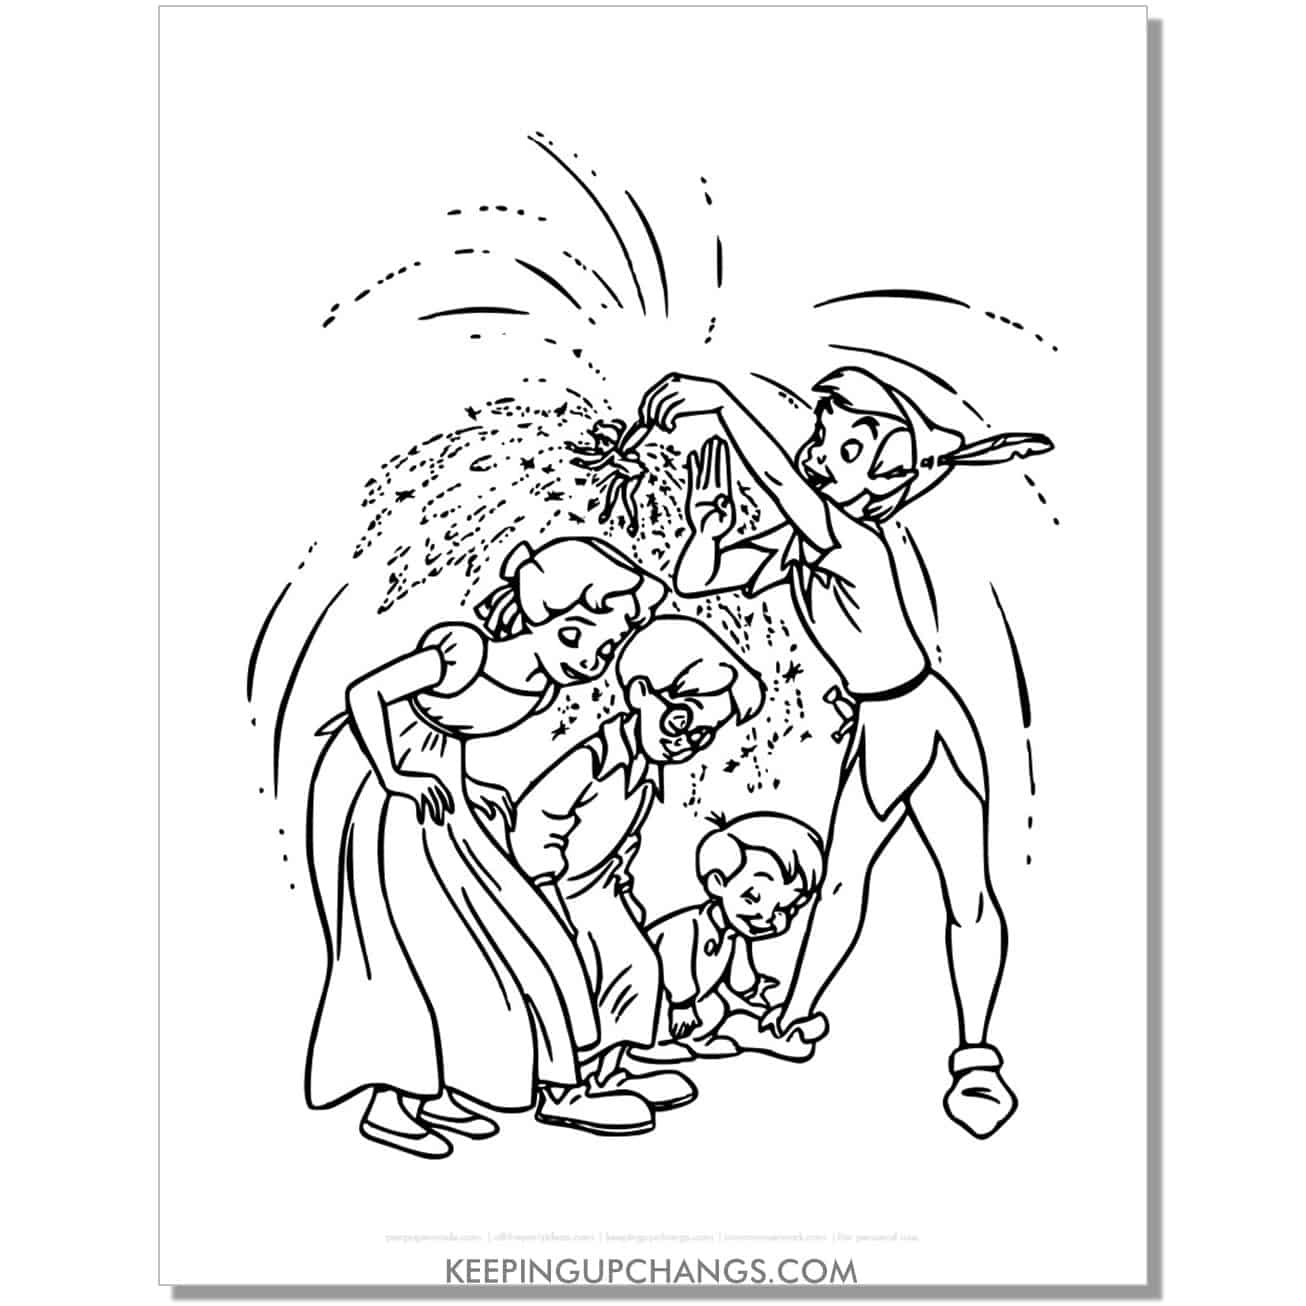 tinkerbell showering pixie dust on wendy, john, michael darling coloring page, sheet.